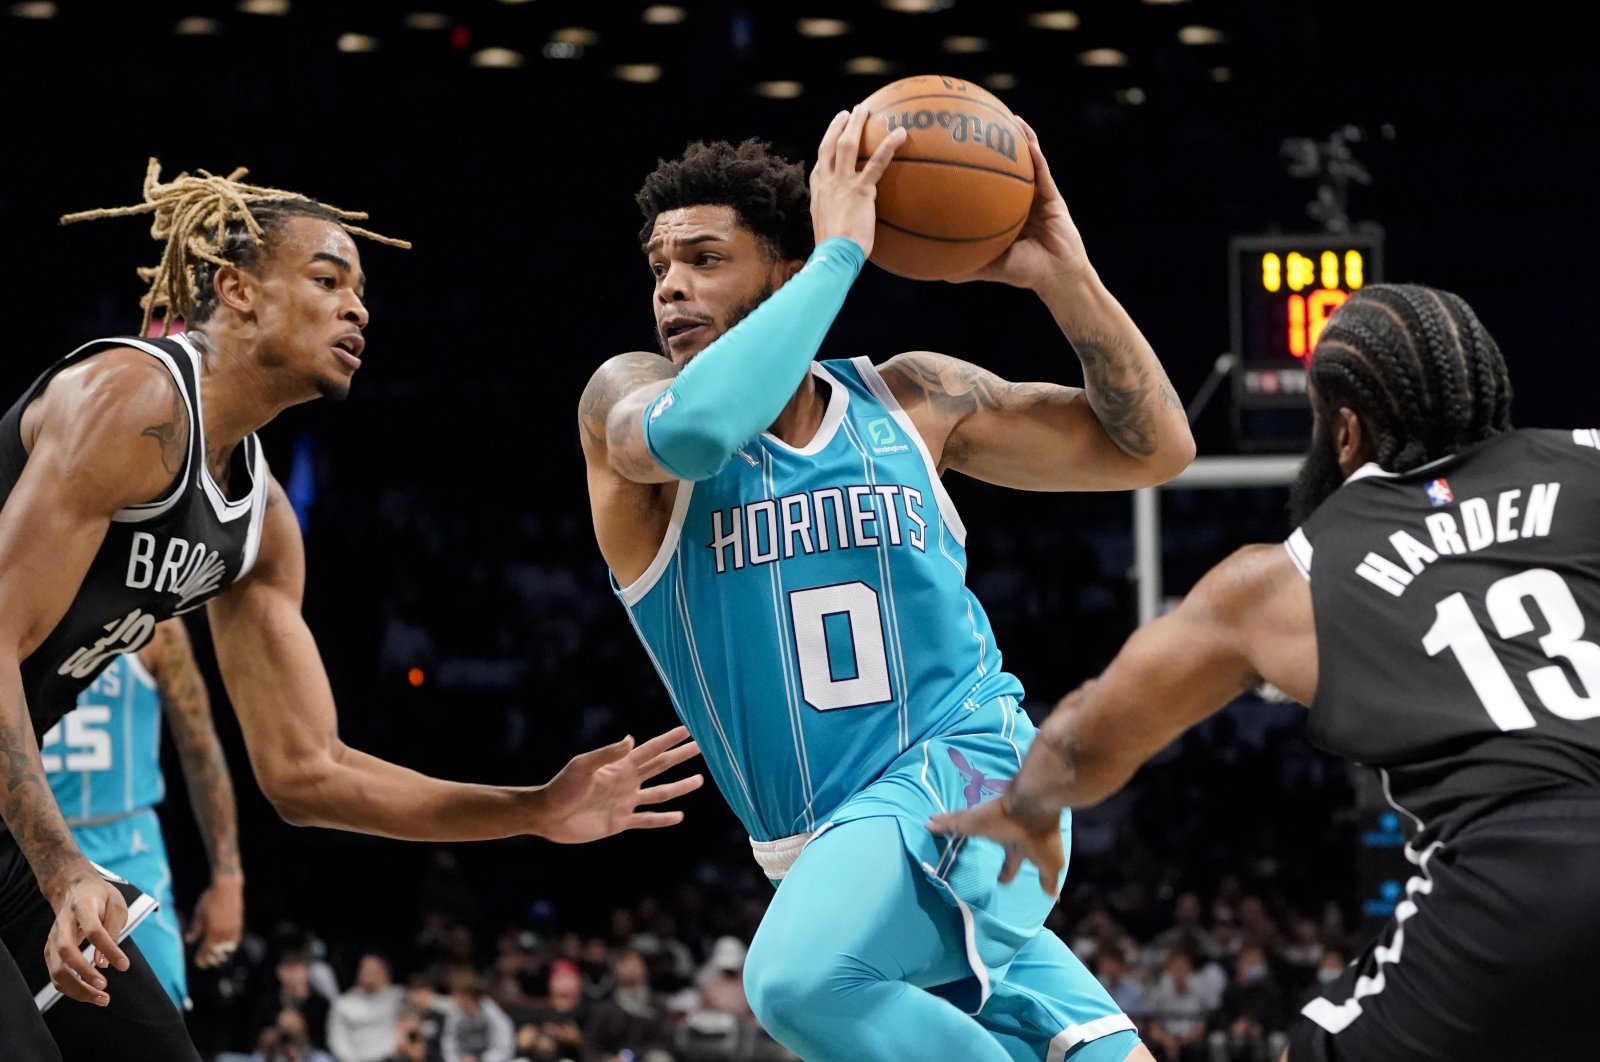 Charlotte Hornets forward Miles Bridges (C) drives past Brooklyn Nets guard James Harden (R) and forward Nic Claxton (L) during the first half of an NBA basketball game, New York, U.S., Oct. 24, 2021. (AP Photo)